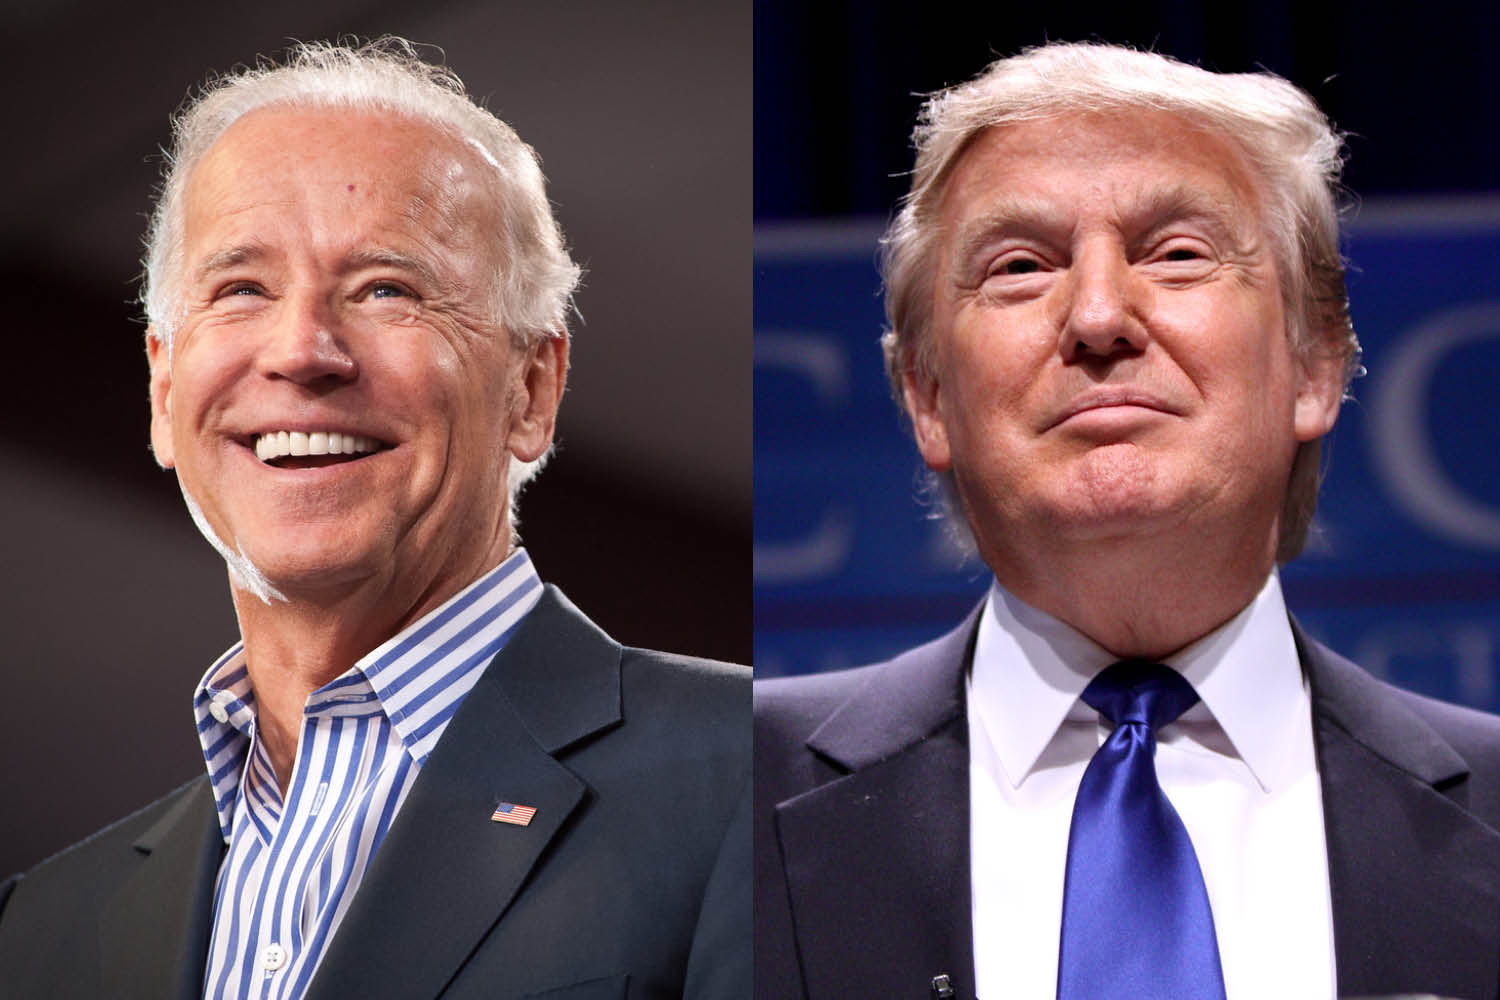 President Trump and Former Vice President Biden challenge one another in this year’s first presidential debate of the 2020 elections. They addressed issues surrounding healthcare, climate change and taxes.